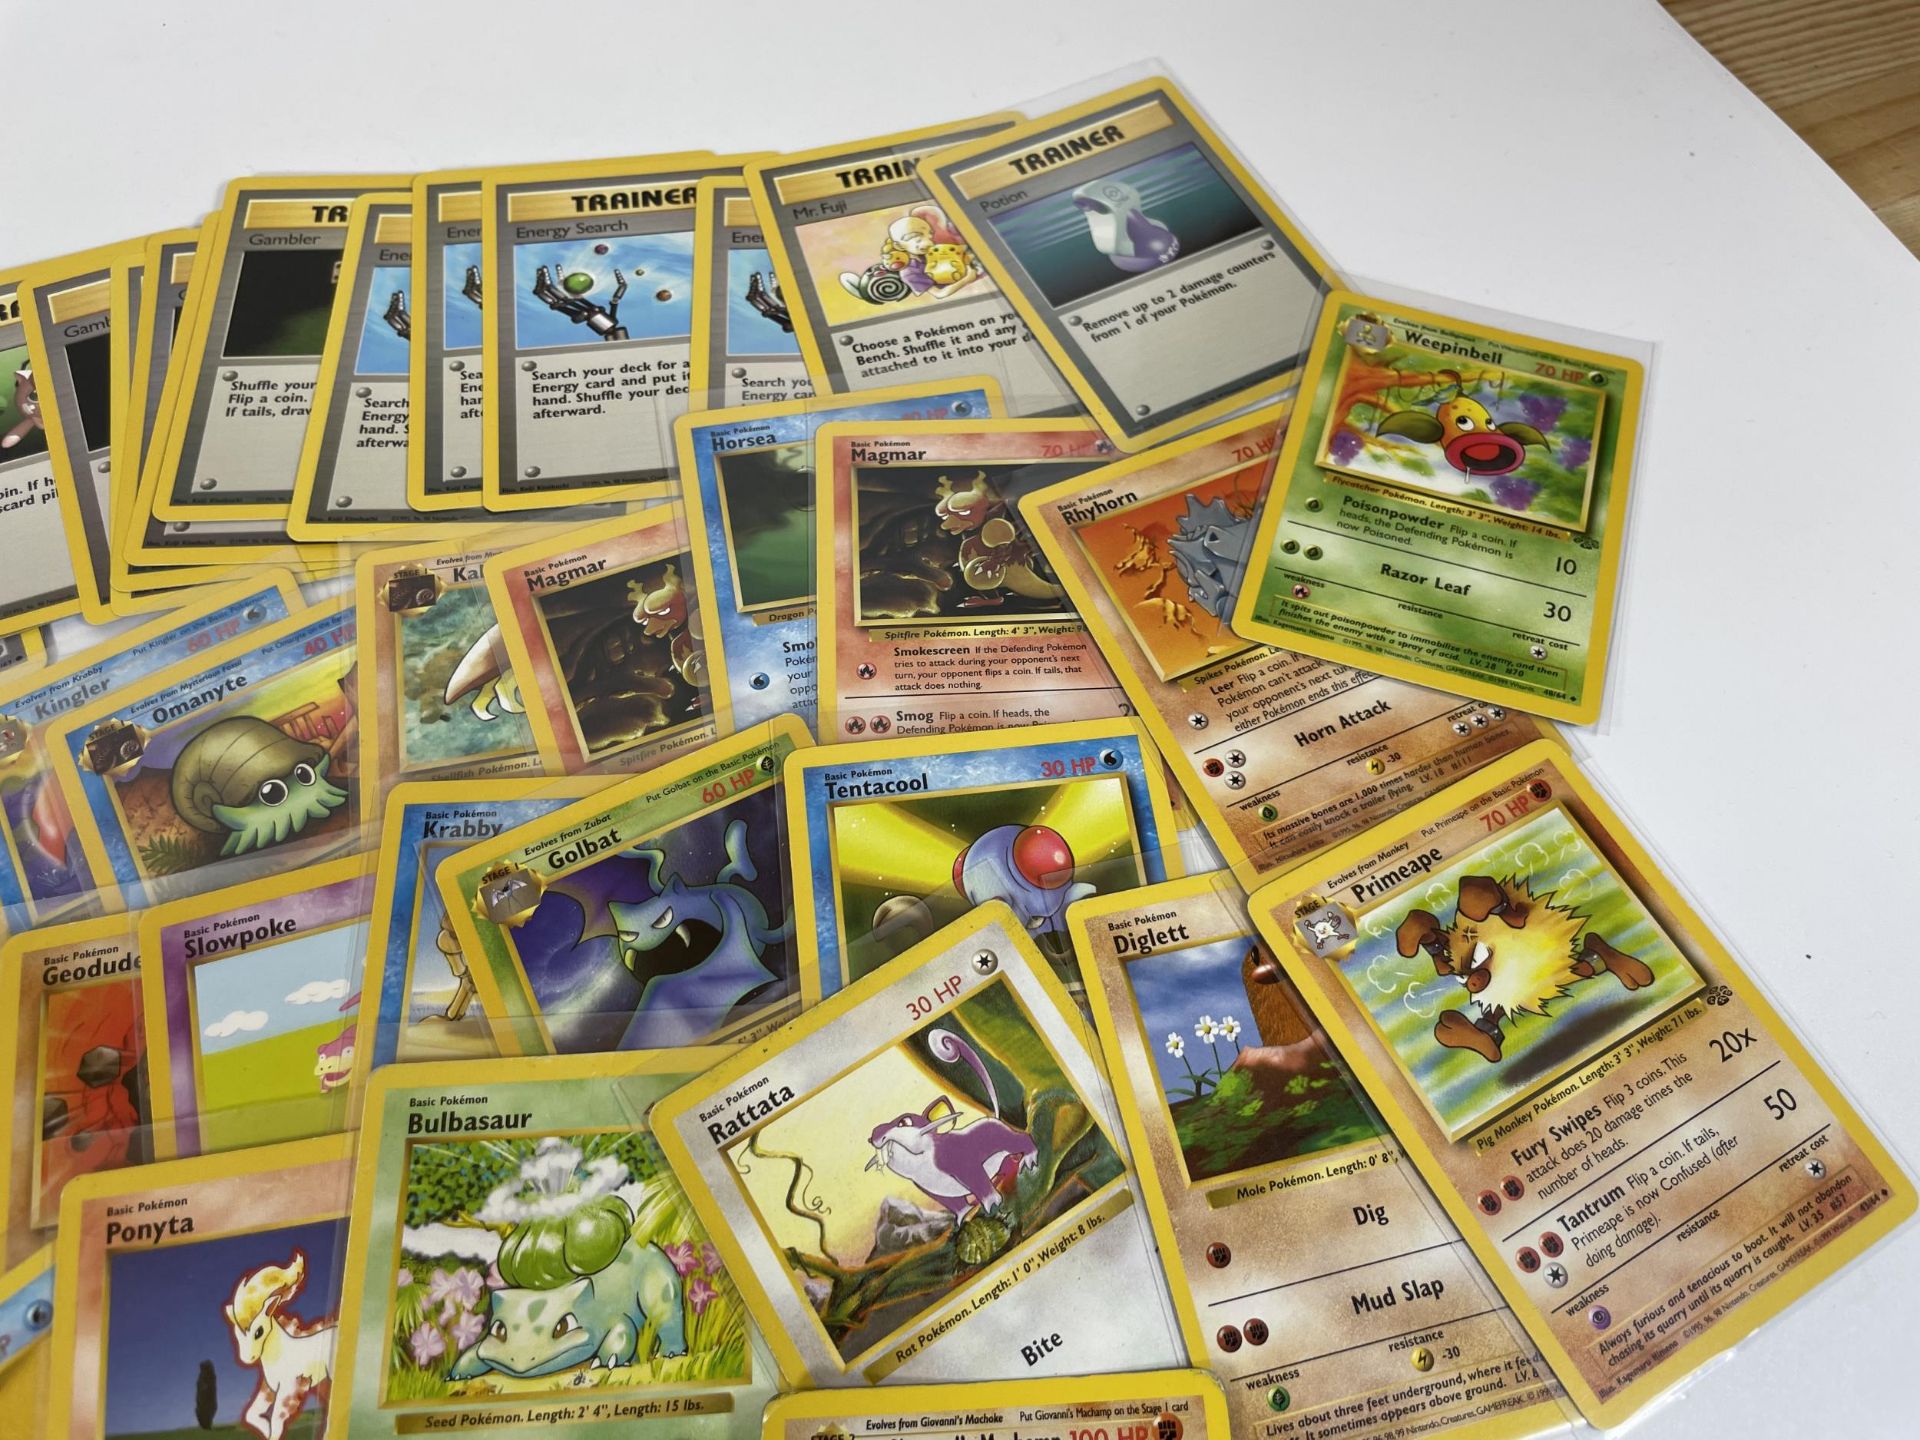 A COLLECTION OF 1999 WOTC POKEMON TRADING CARDS, GYM HEROES HOLOS, SHADOWLESS, BASE SET, JUNGLE, - Image 5 of 5